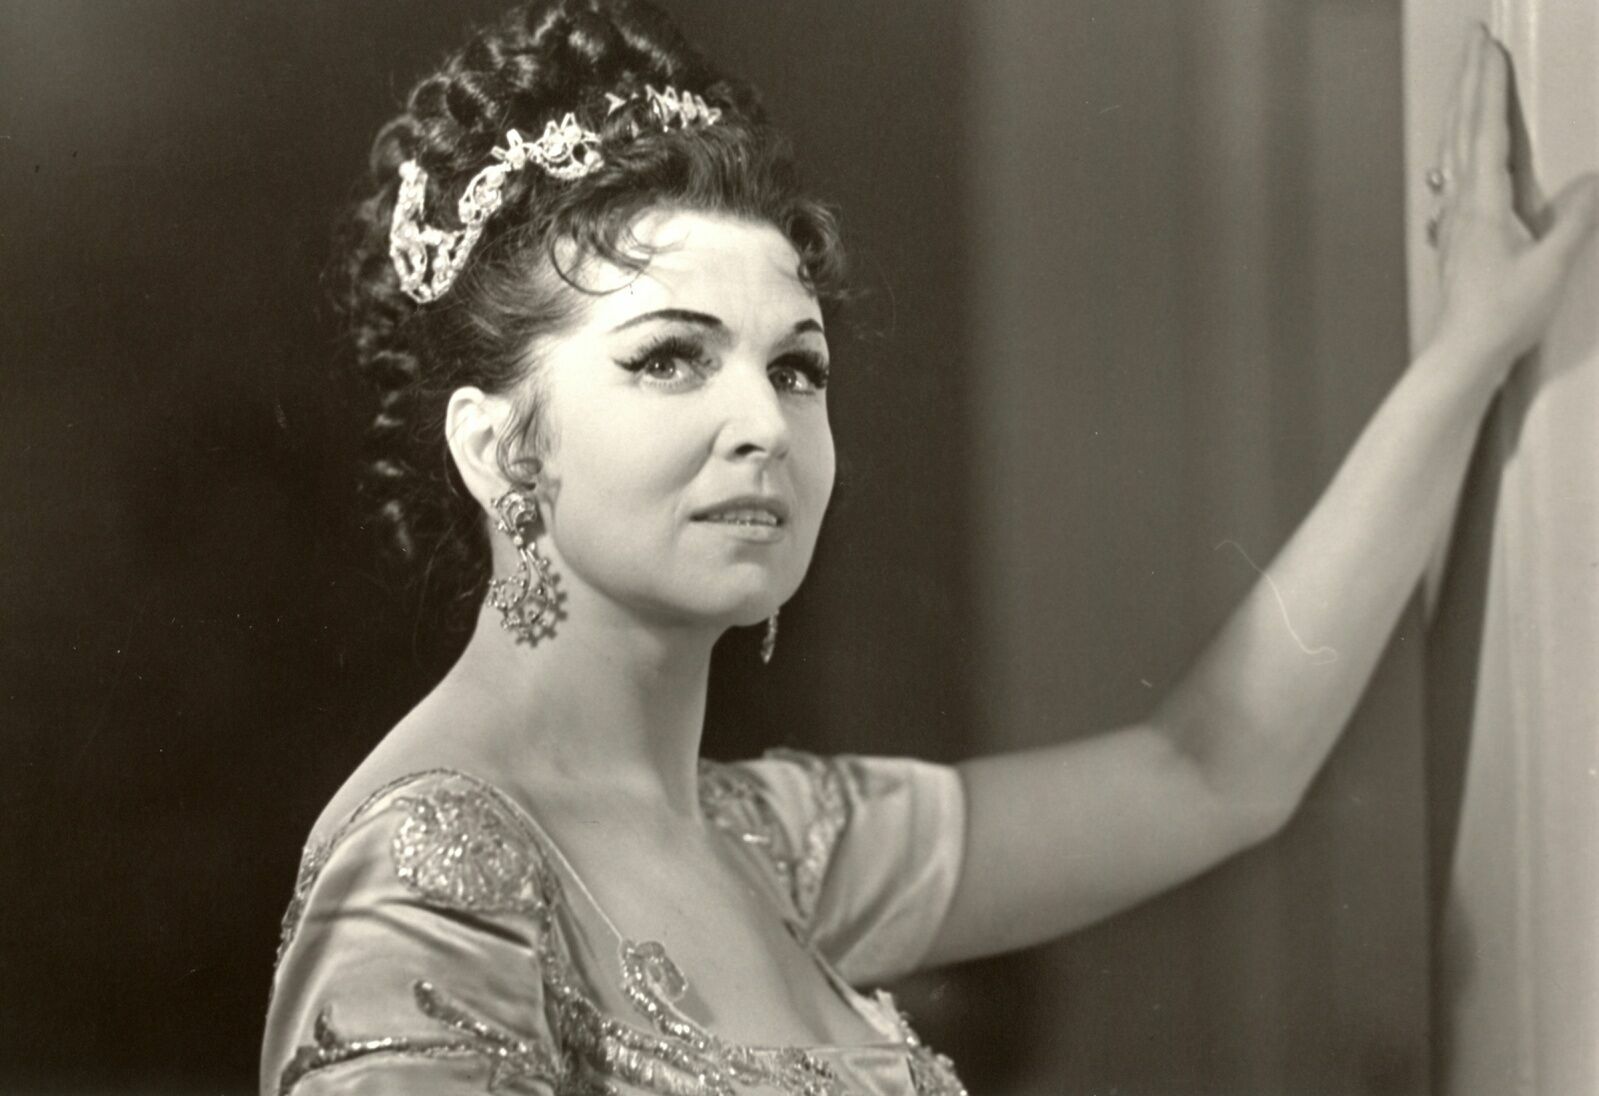 The 95th anniversary of the birth of Galina Vishnevskaya will be celebrated with a gala concert at the Bolshoi Theater